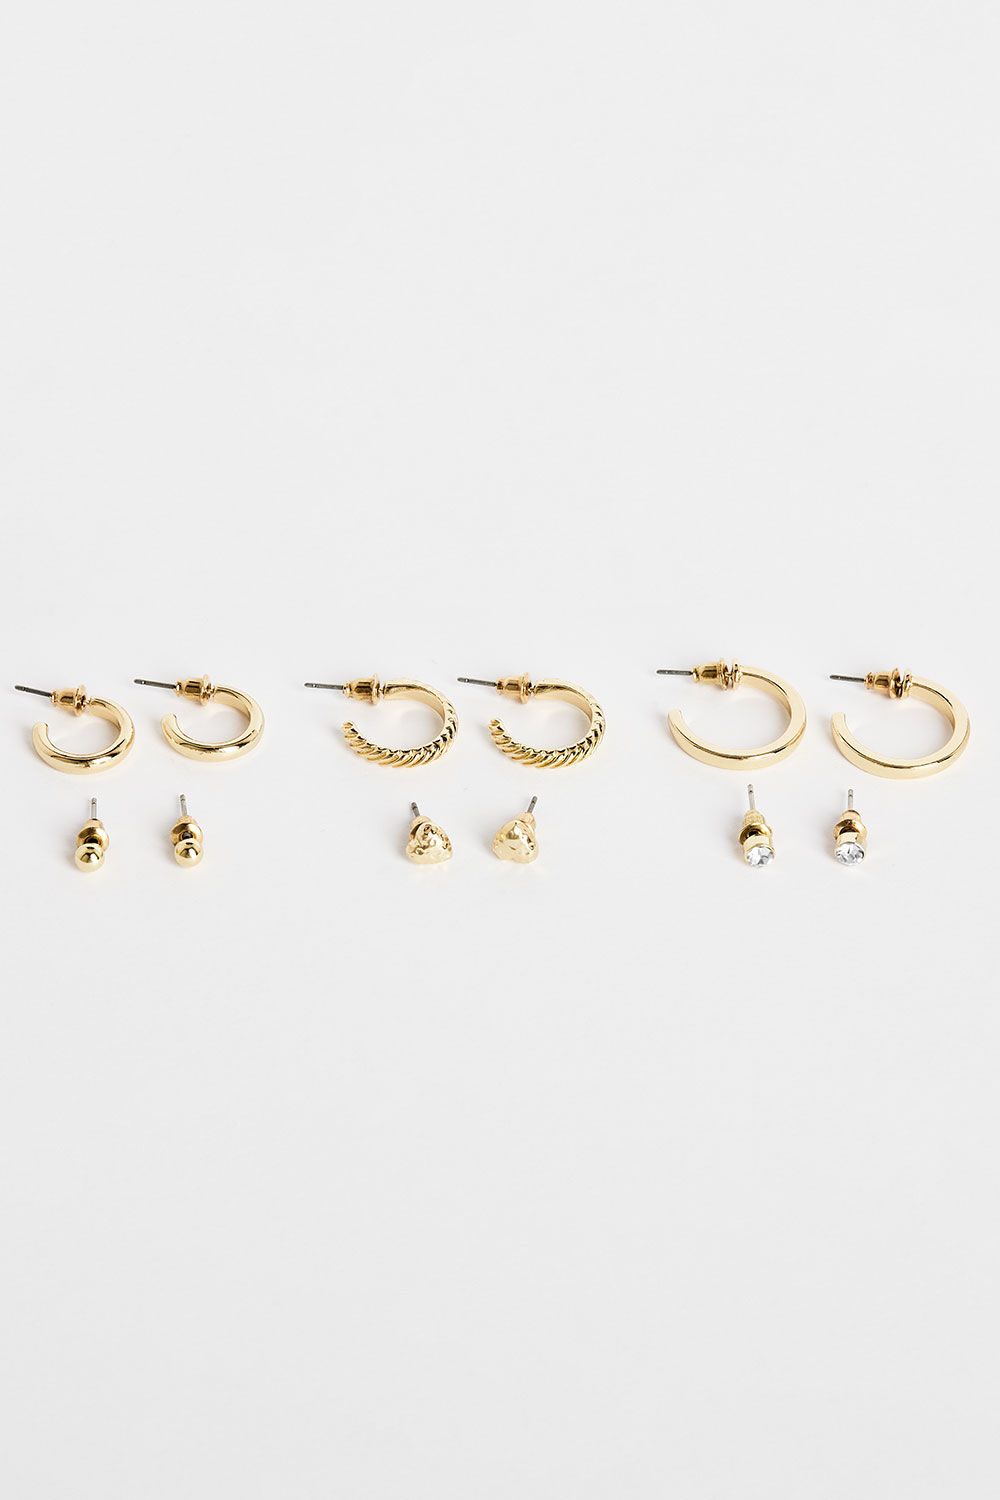 Bonmarche Gold 6 Pack Stud and Hoop Earrings, Size: One Size